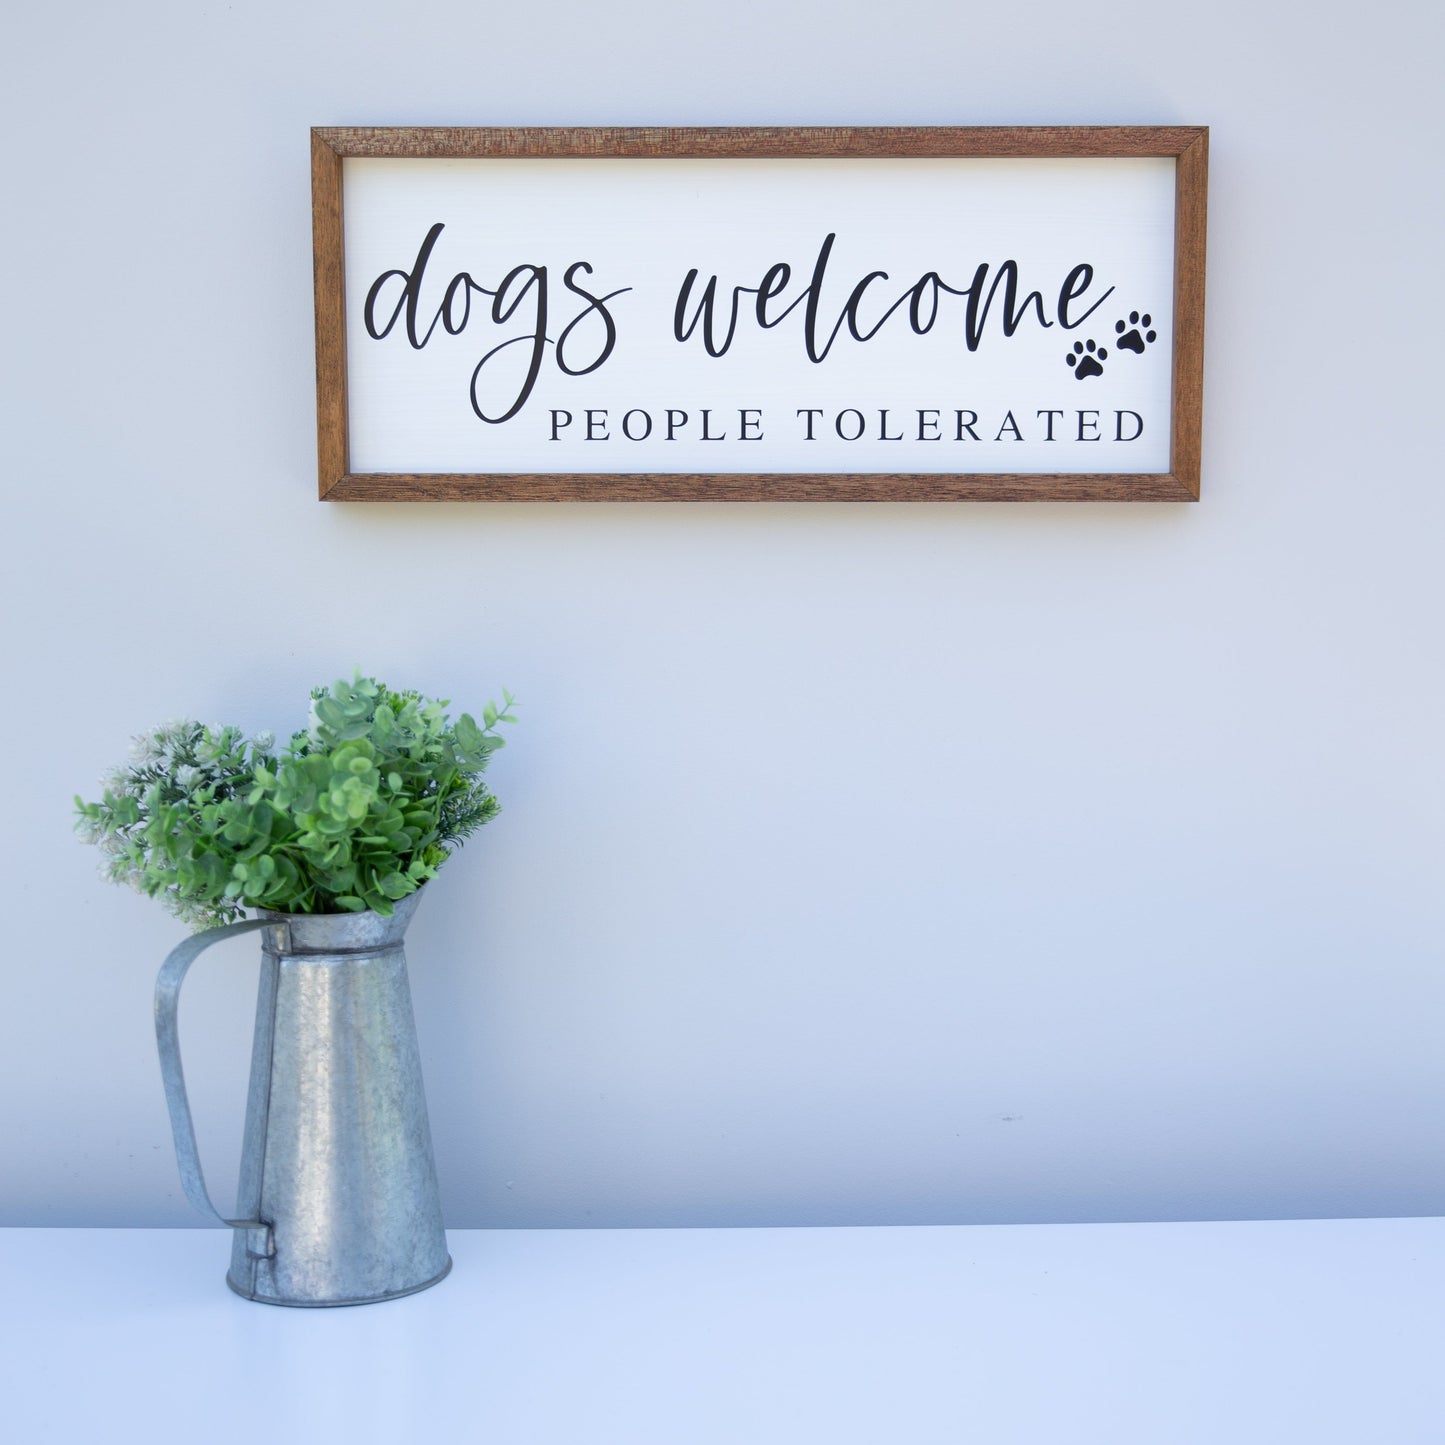 Dogs Welcome - People Tolerated